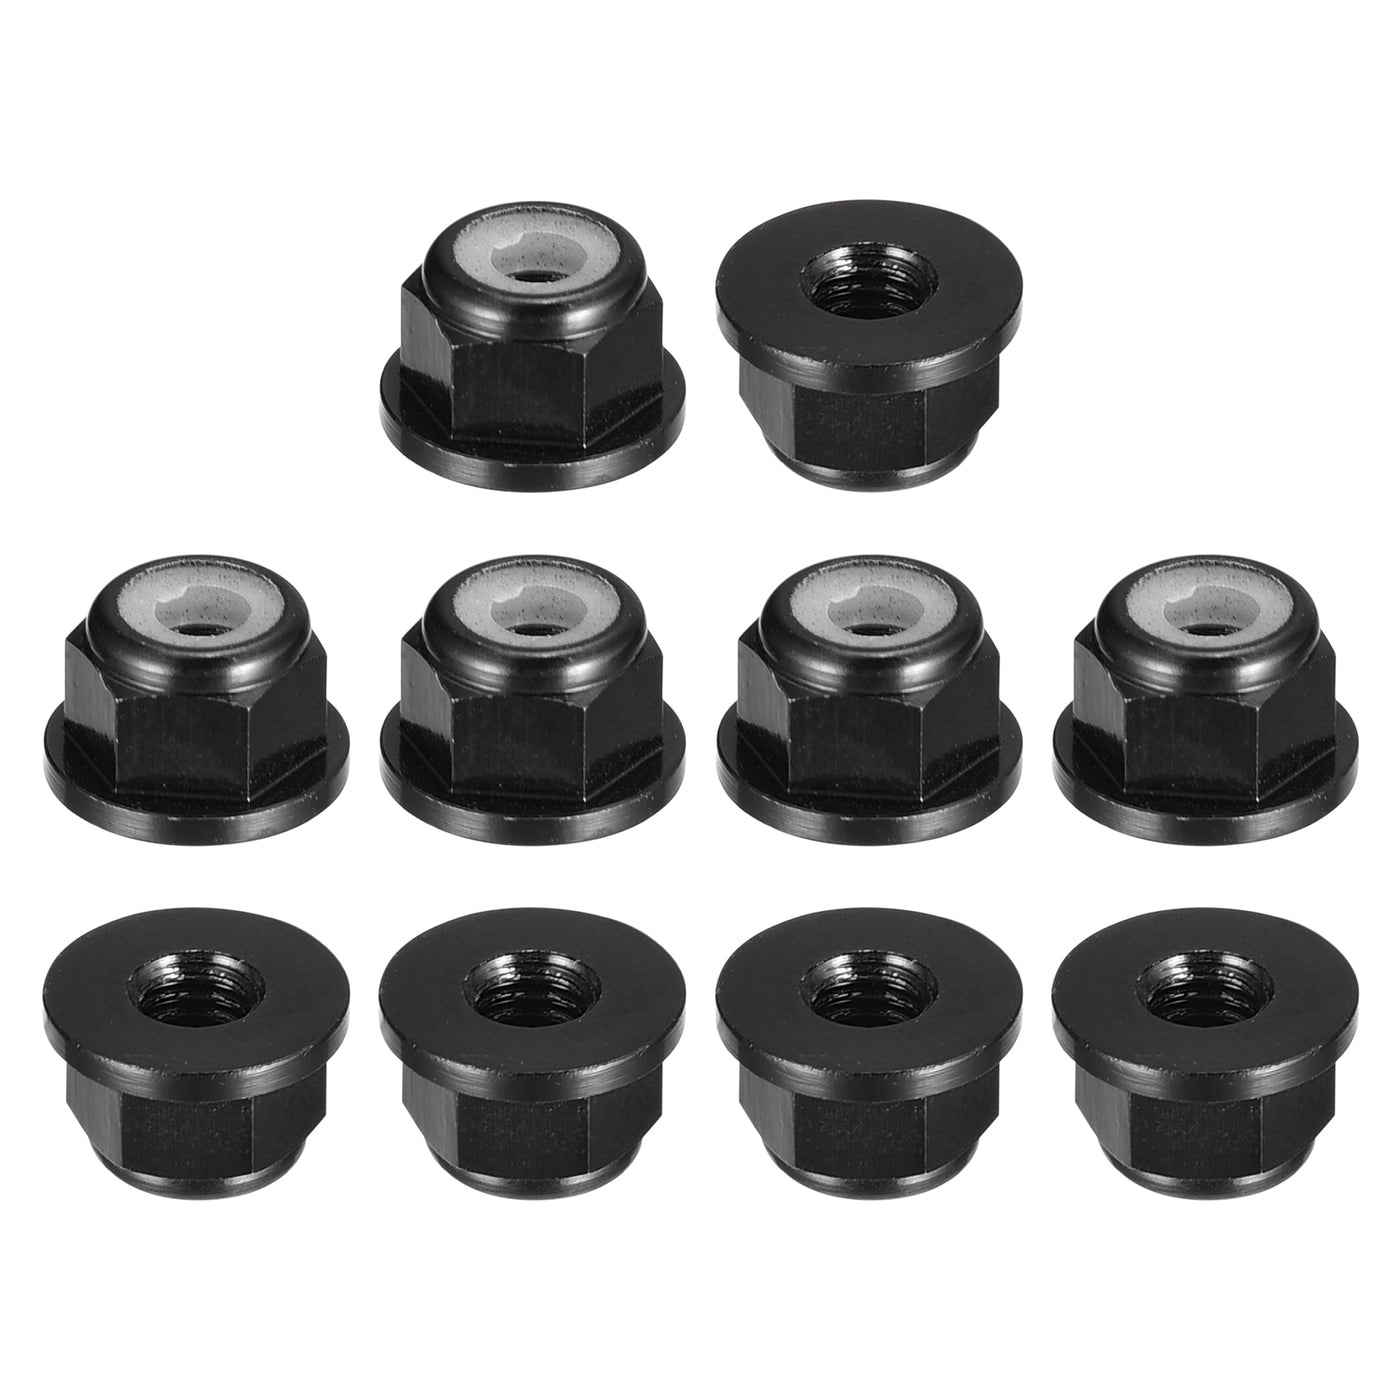 uxcell Uxcell Nylon Insert Hex Lock Nuts, 10pcs - M3 x 0.5mm Aluminum Alloy Self-Locking Nut, Anodizing Flange Lock Nut for Fasteners (Black)